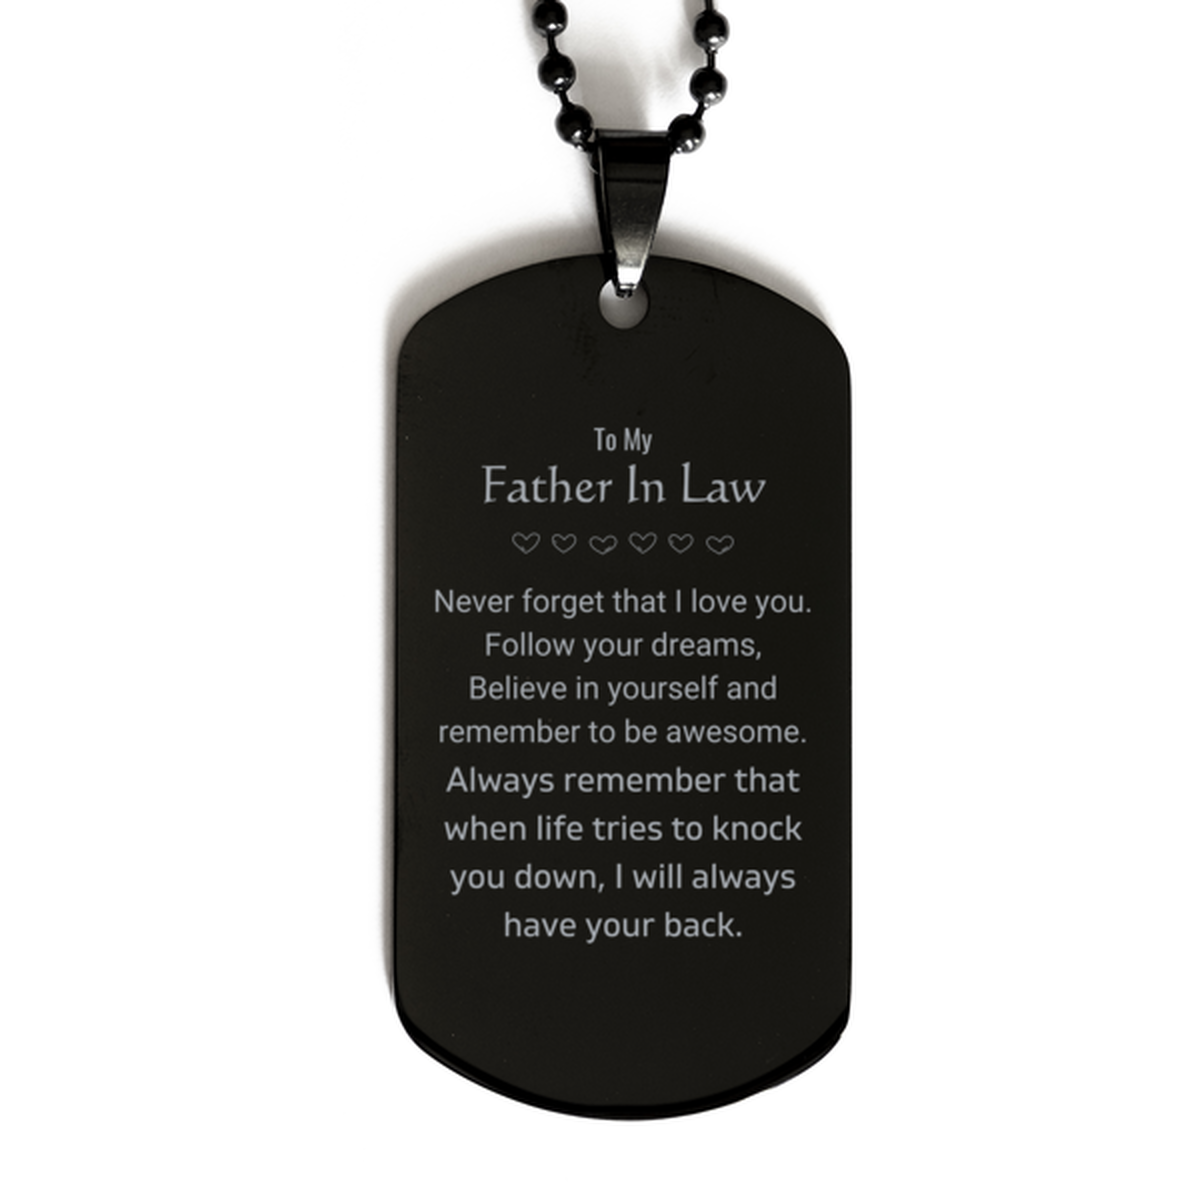 Inspirational Gifts for Father In Law, Follow your dreams, Believe in yourself, Father In Law Black Dog Tag, Birthday Christmas Unique Gifts For Father In Law